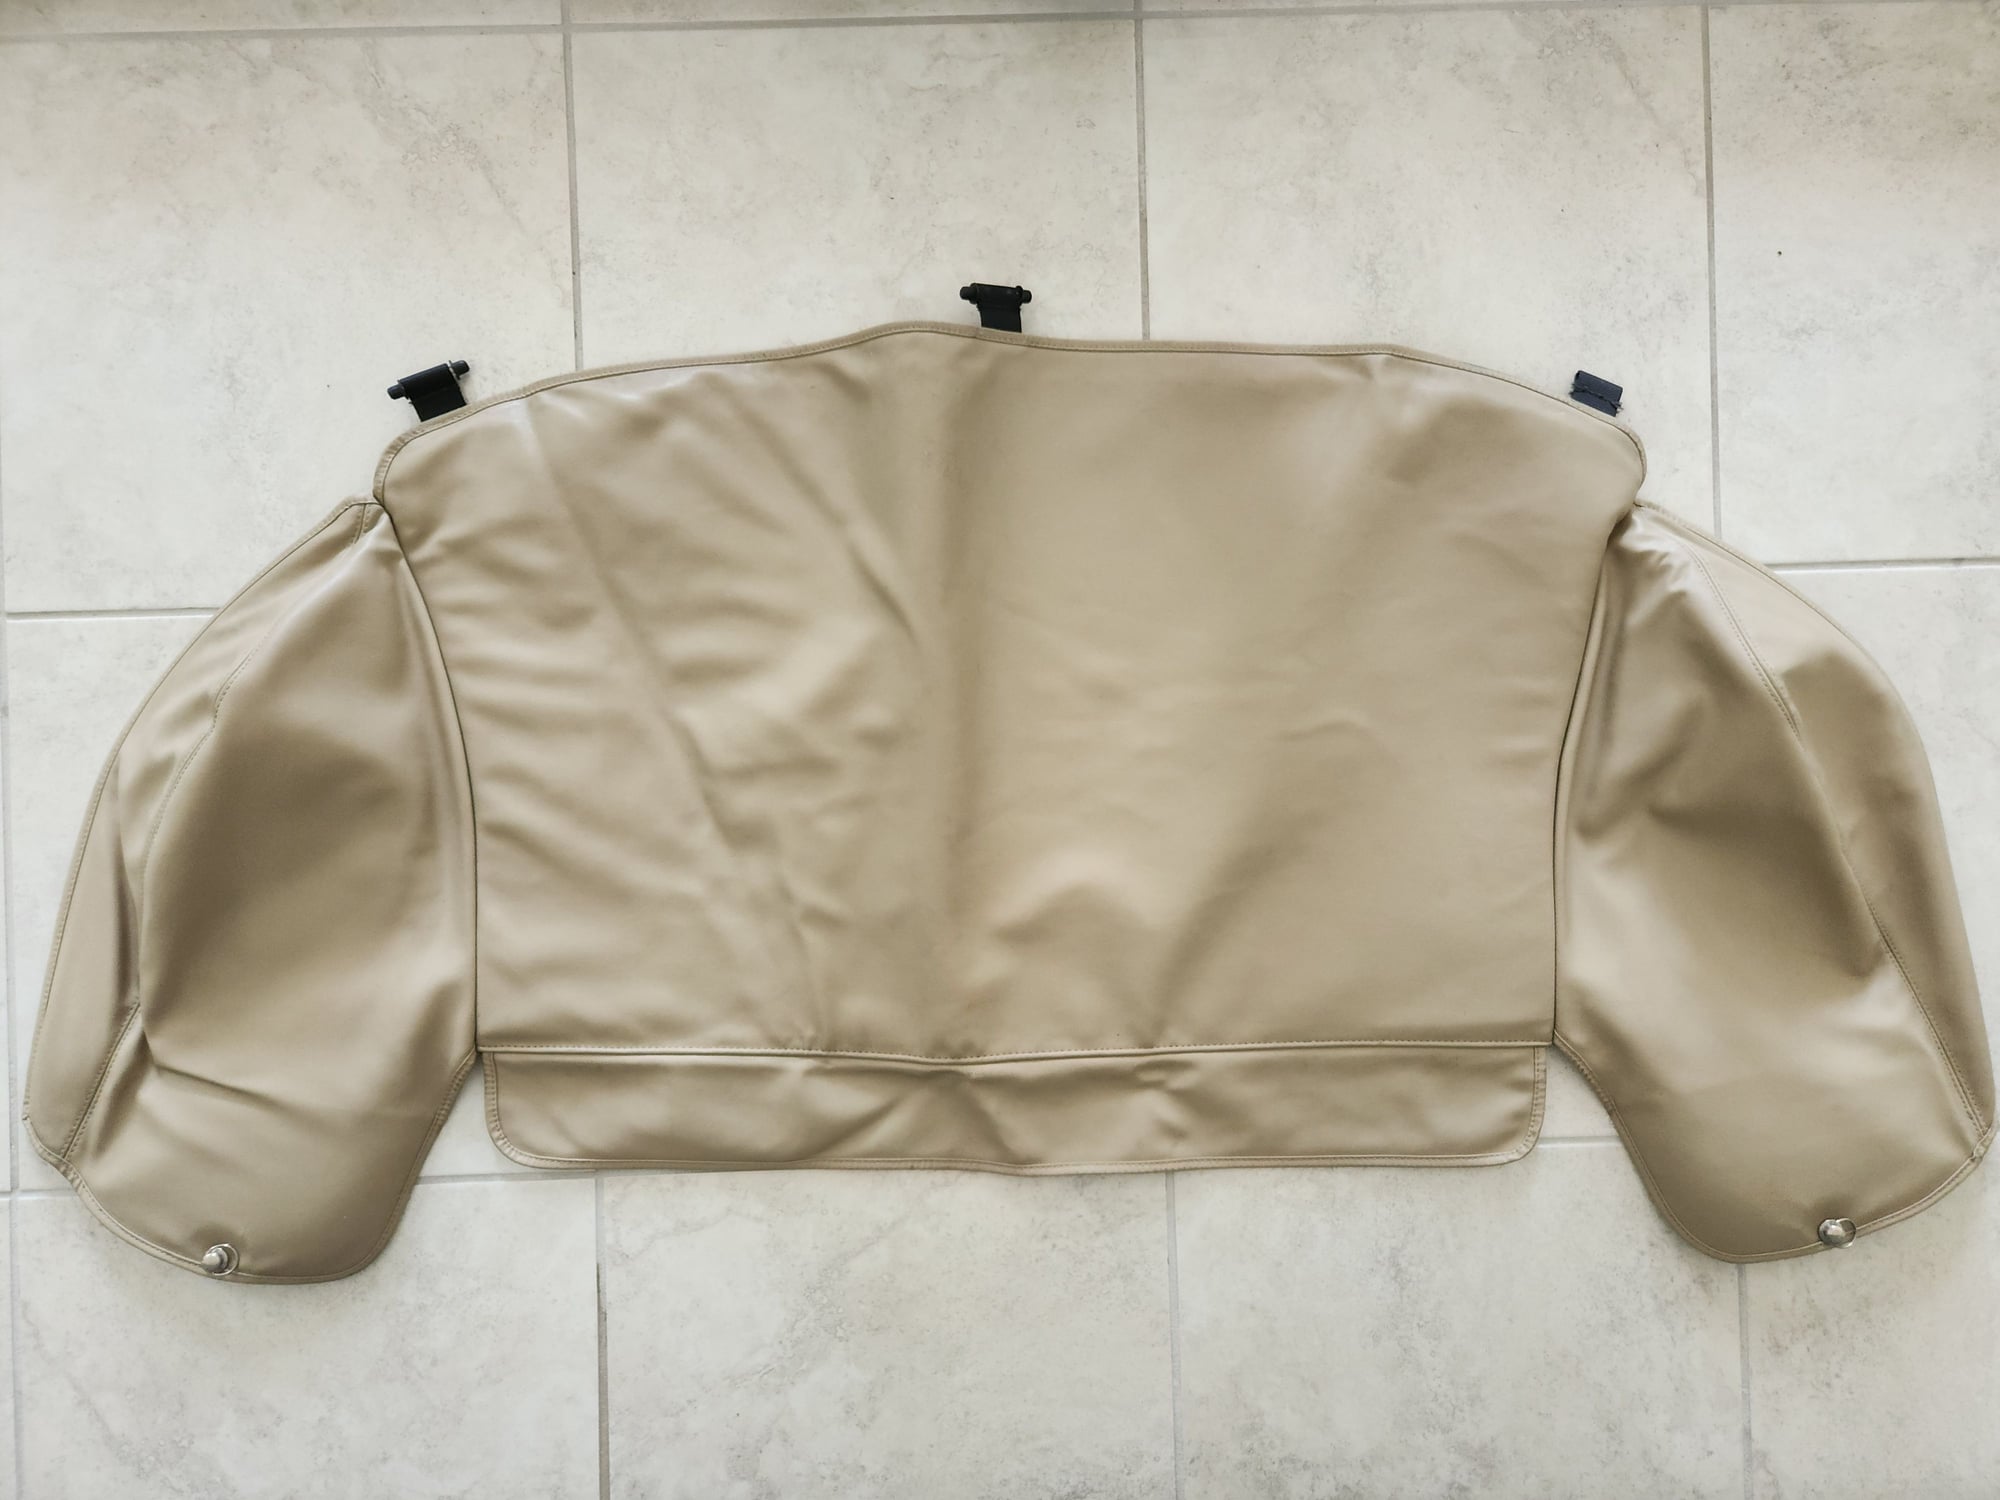 Interior/Upholstery - Tonnue cover, SDZ cashmere with storage bag - Used - 1996 to 2006 Jaguar XK8 - Venice, FL 34293, United States